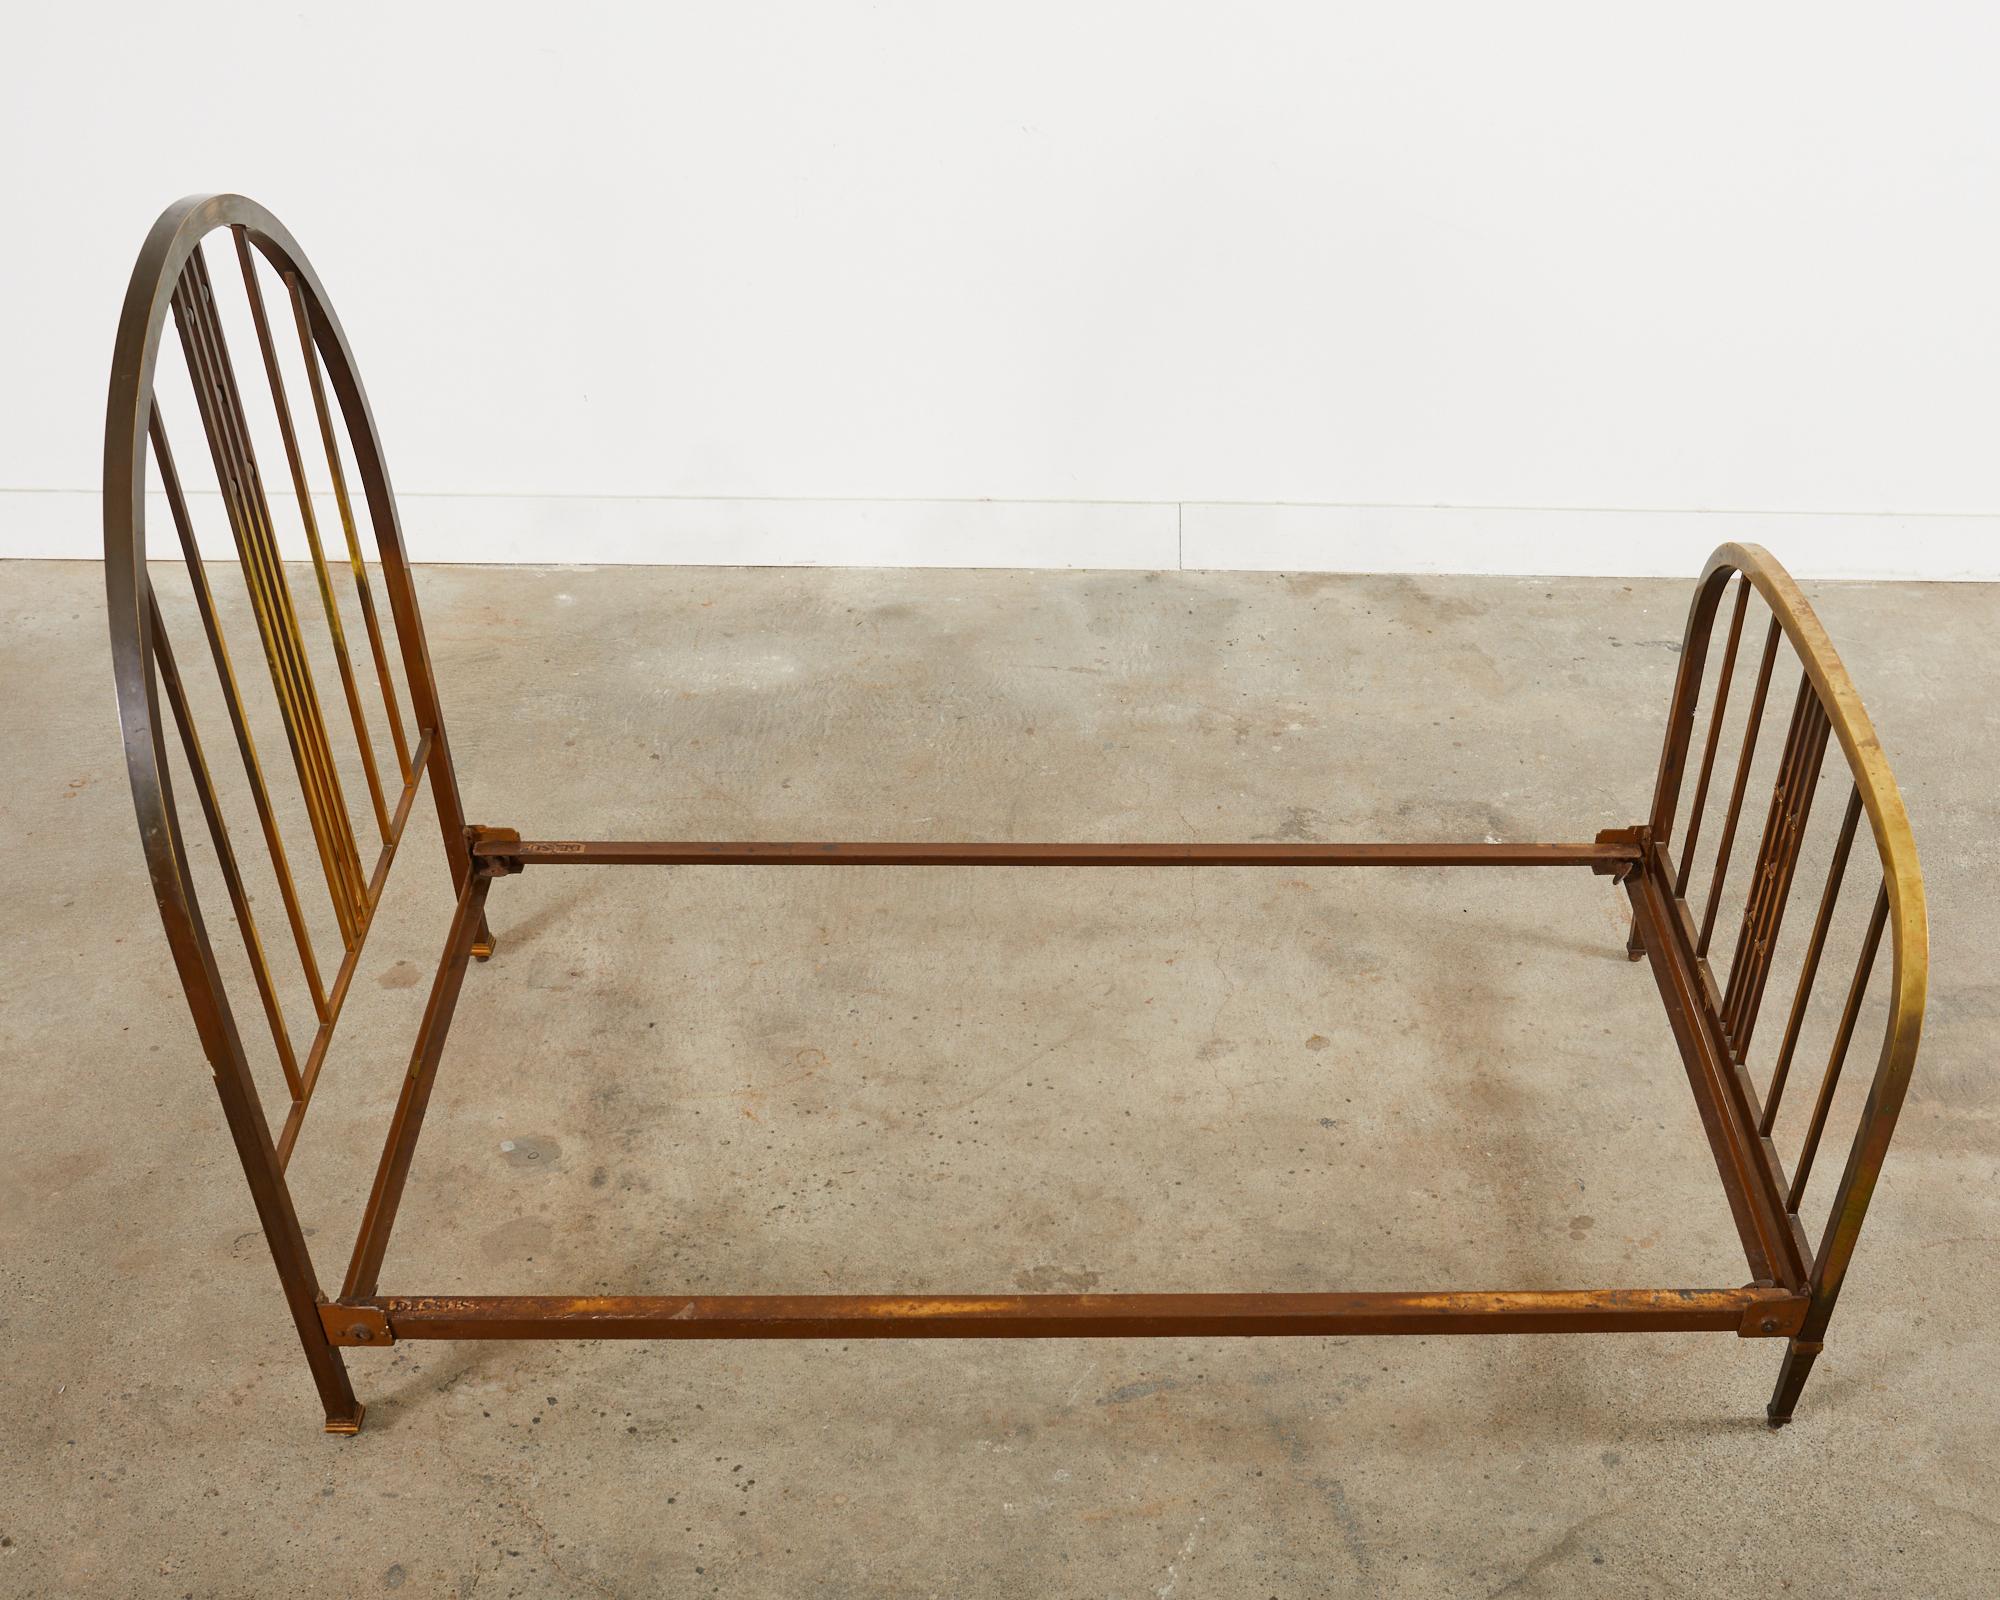 French Art Deco Period Patinated Brass Bed Frame For Sale 2